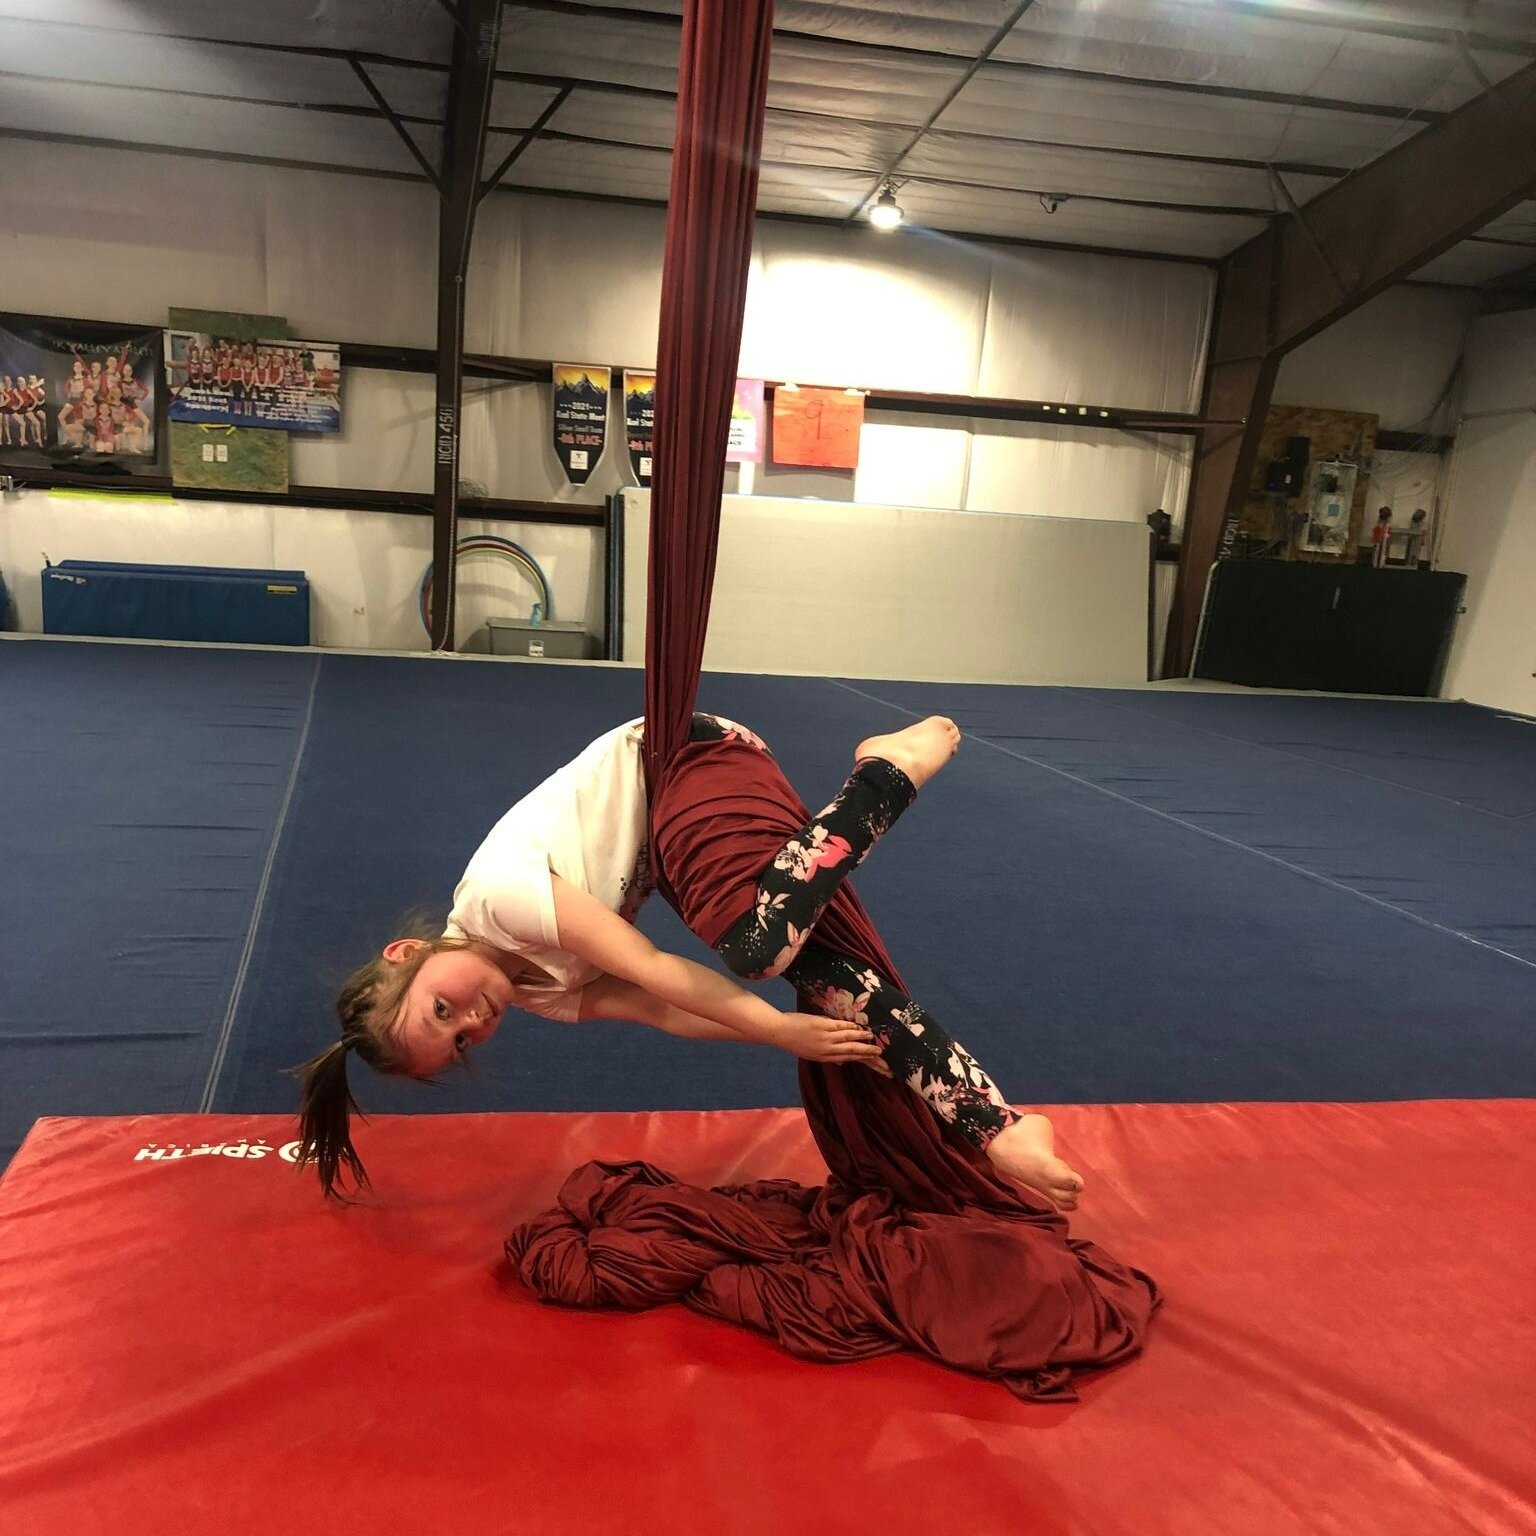 Shout out to one of our silk students for getting into her first Hip Key from a russian climb!! Hip Keys are probably one of THE most difficult beginner skills!!!

#arkvalleyathletics #silks #aerial #circus #hipkey